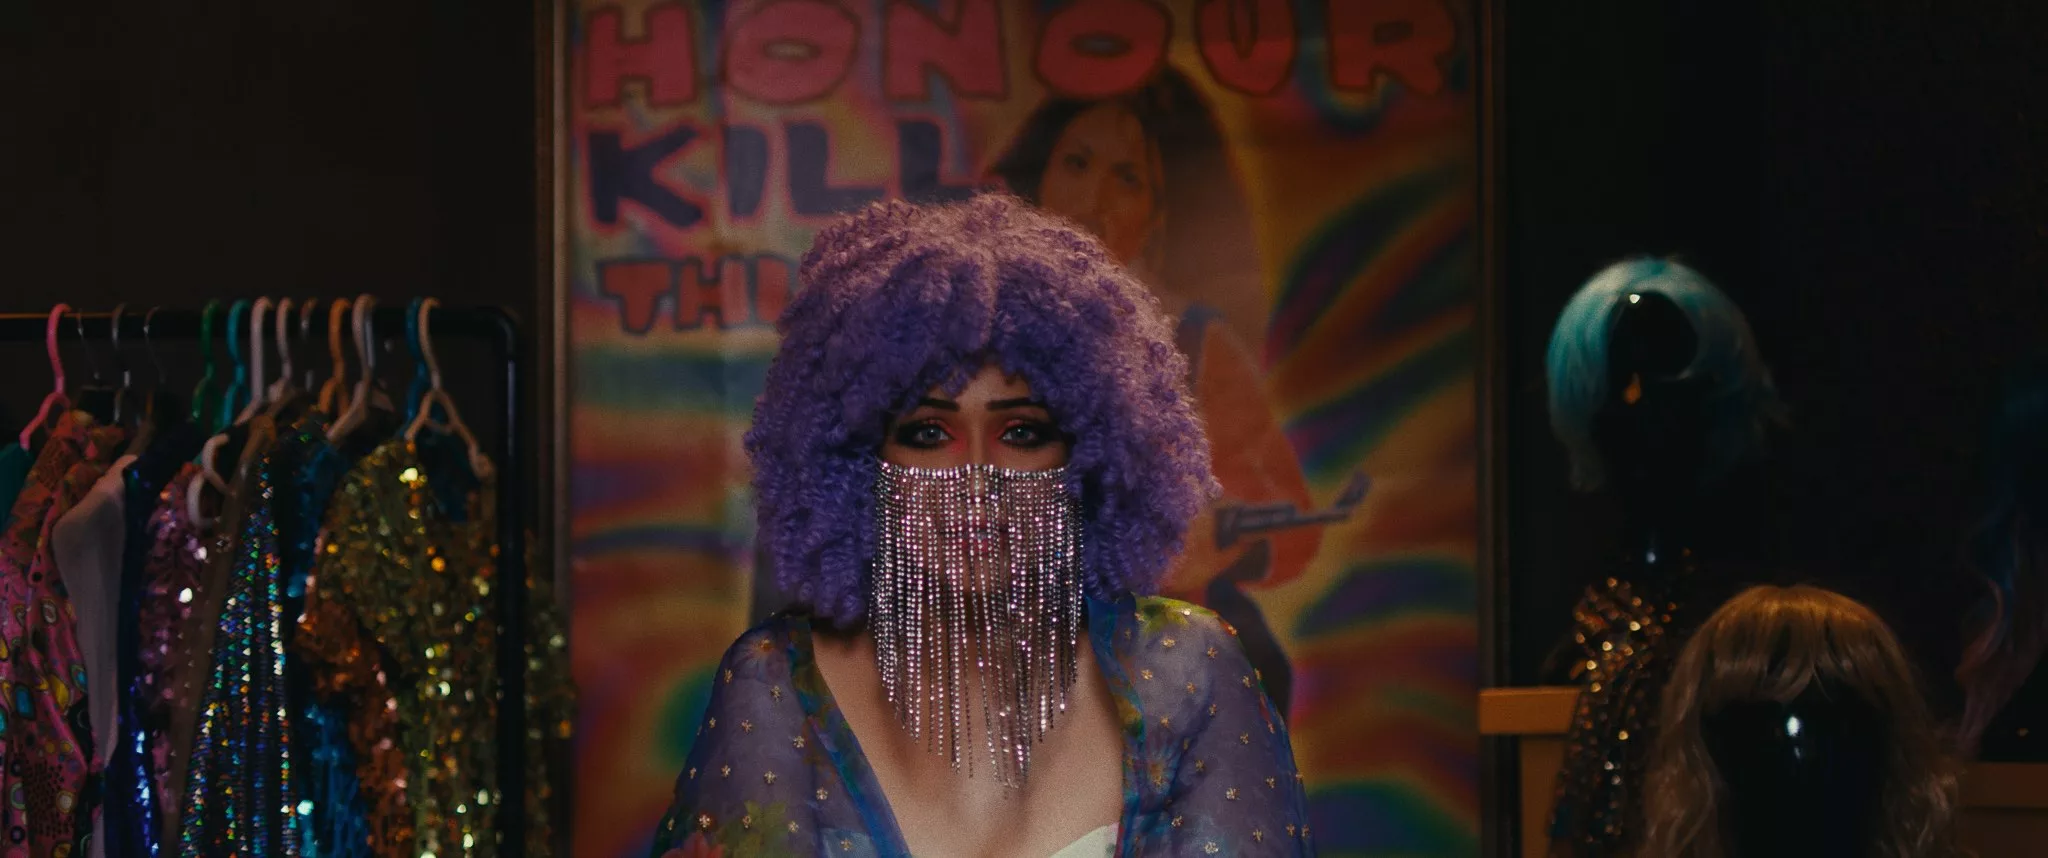 A woman with a purple wig & dress and a beaded face mask stares with an expression of urgency